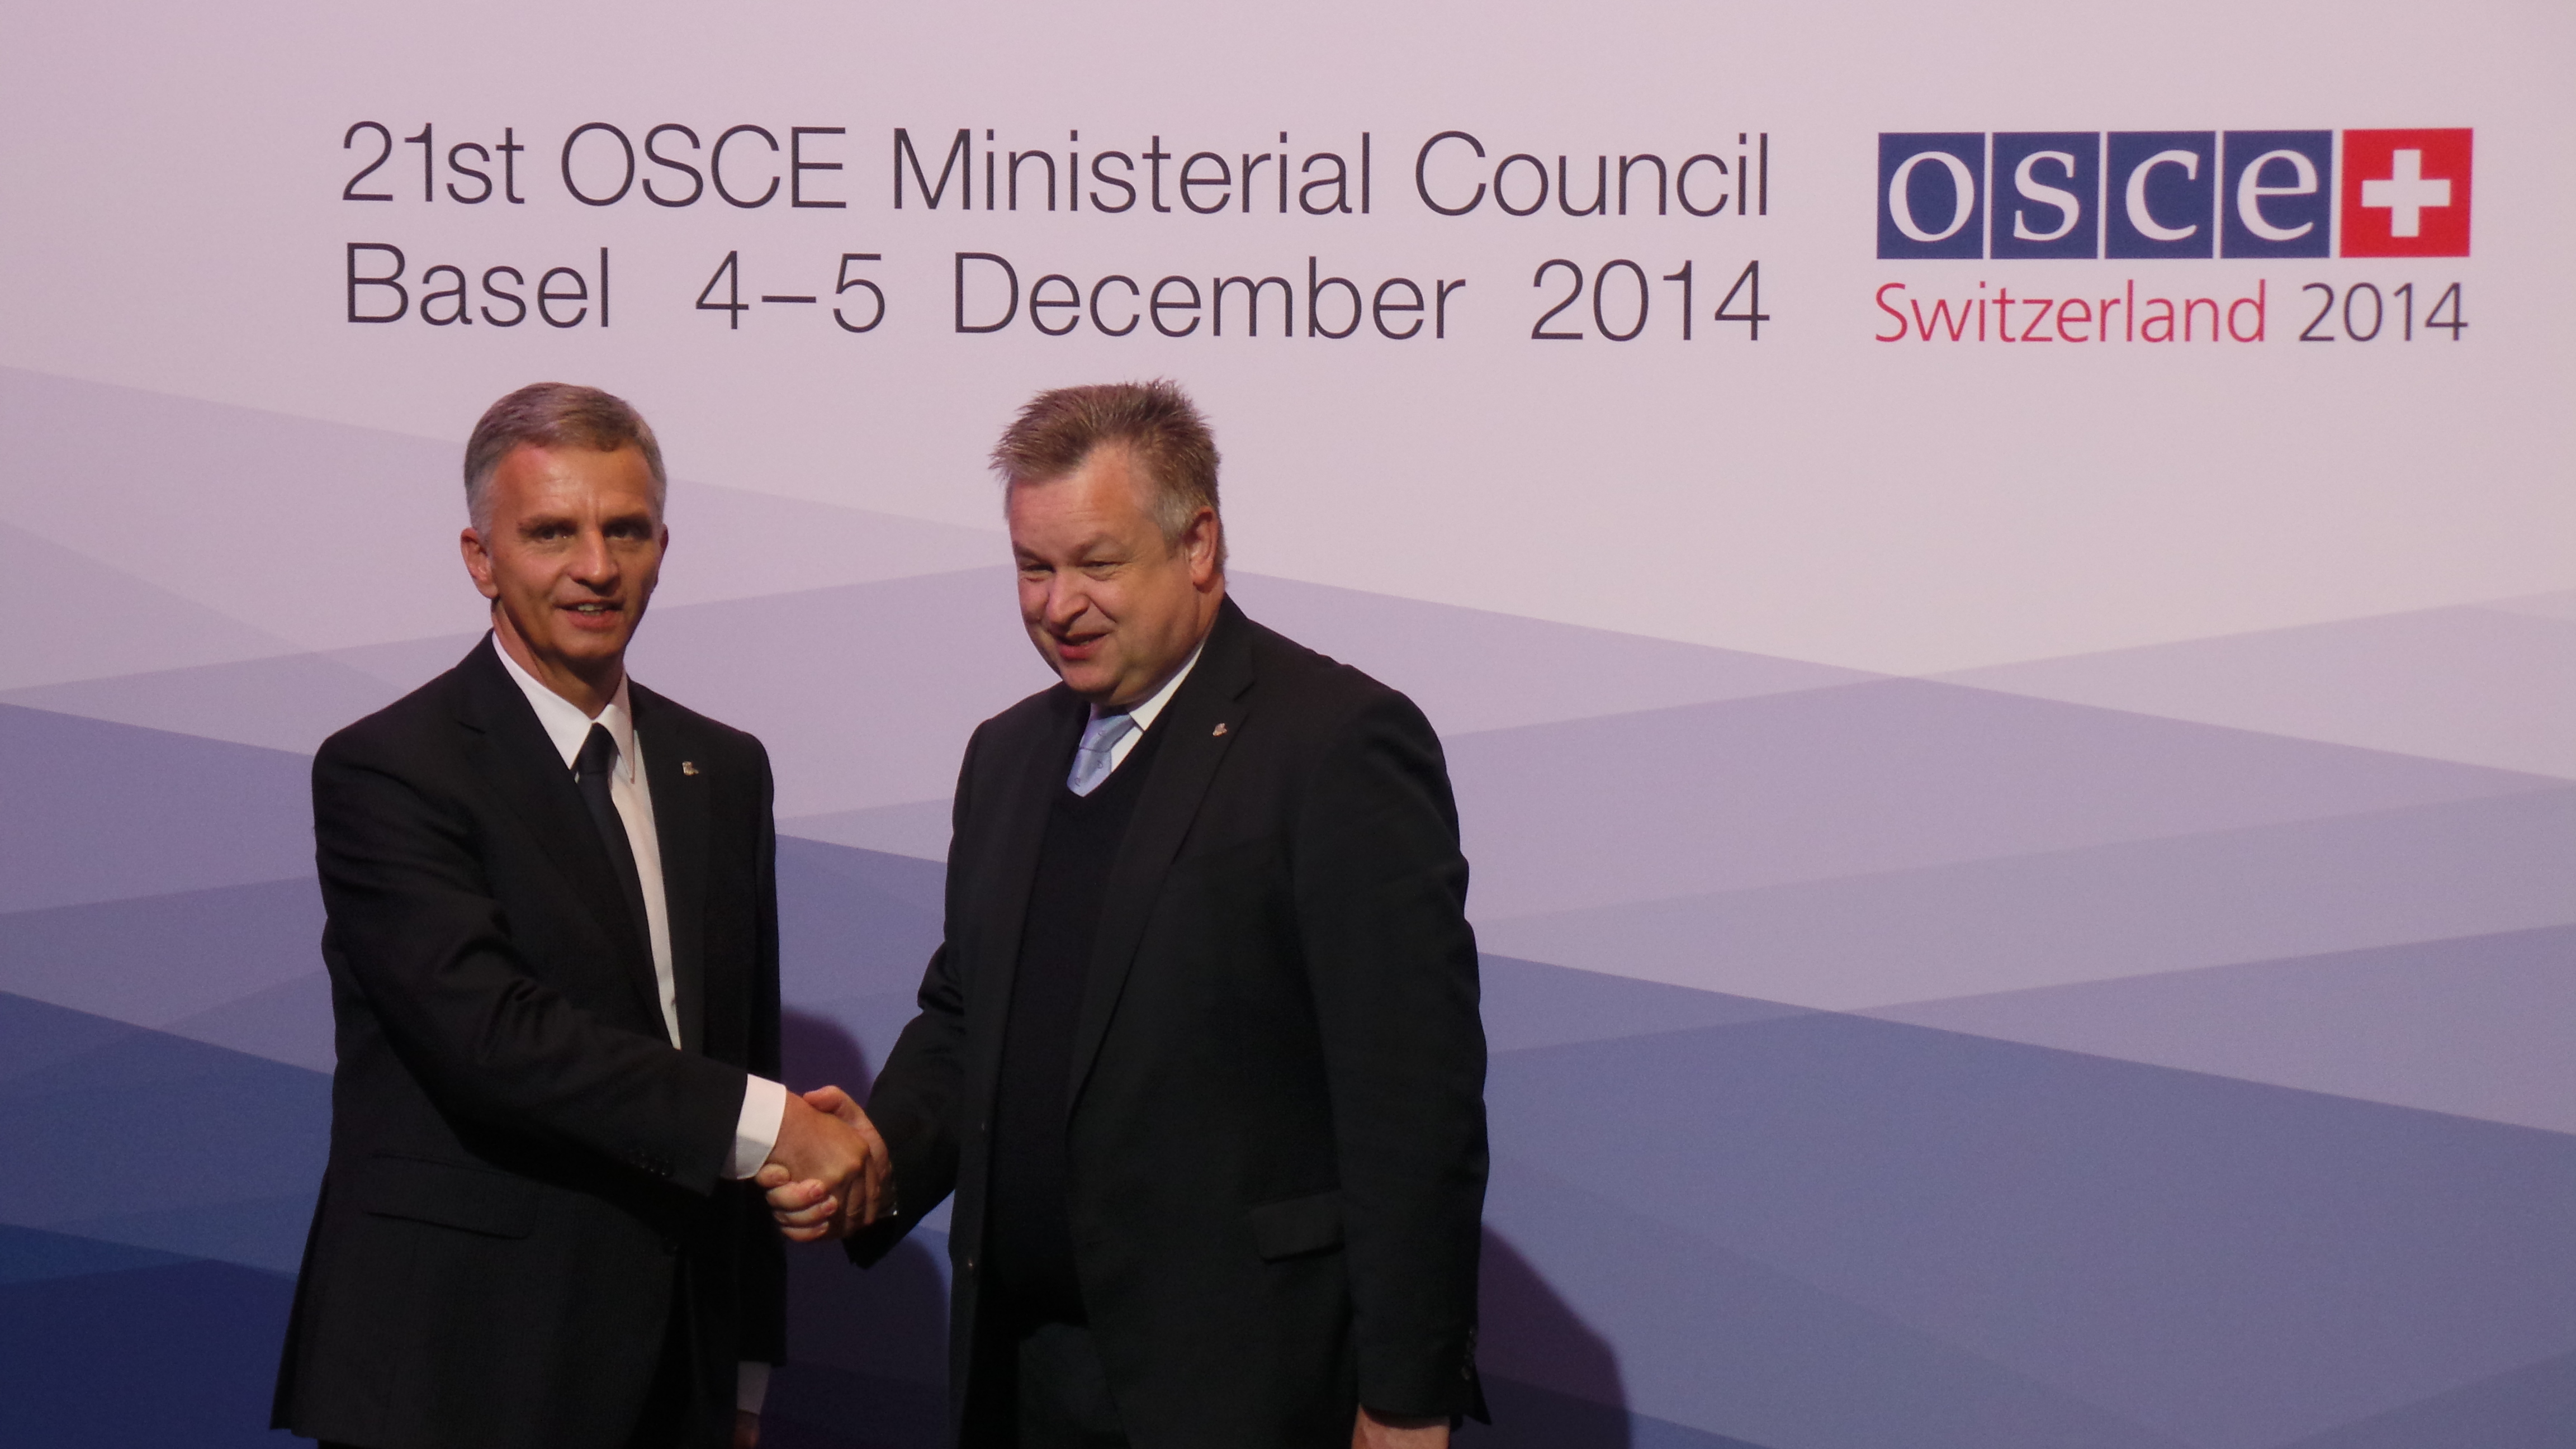 The President of the Swiss Confederation, Didier Burkhalter, greets Michael Georg Link, Director of the office for Democratic Insititutions and Human Rights (ODIHR) at the OSCE Ministerial Council 2014 in Basel